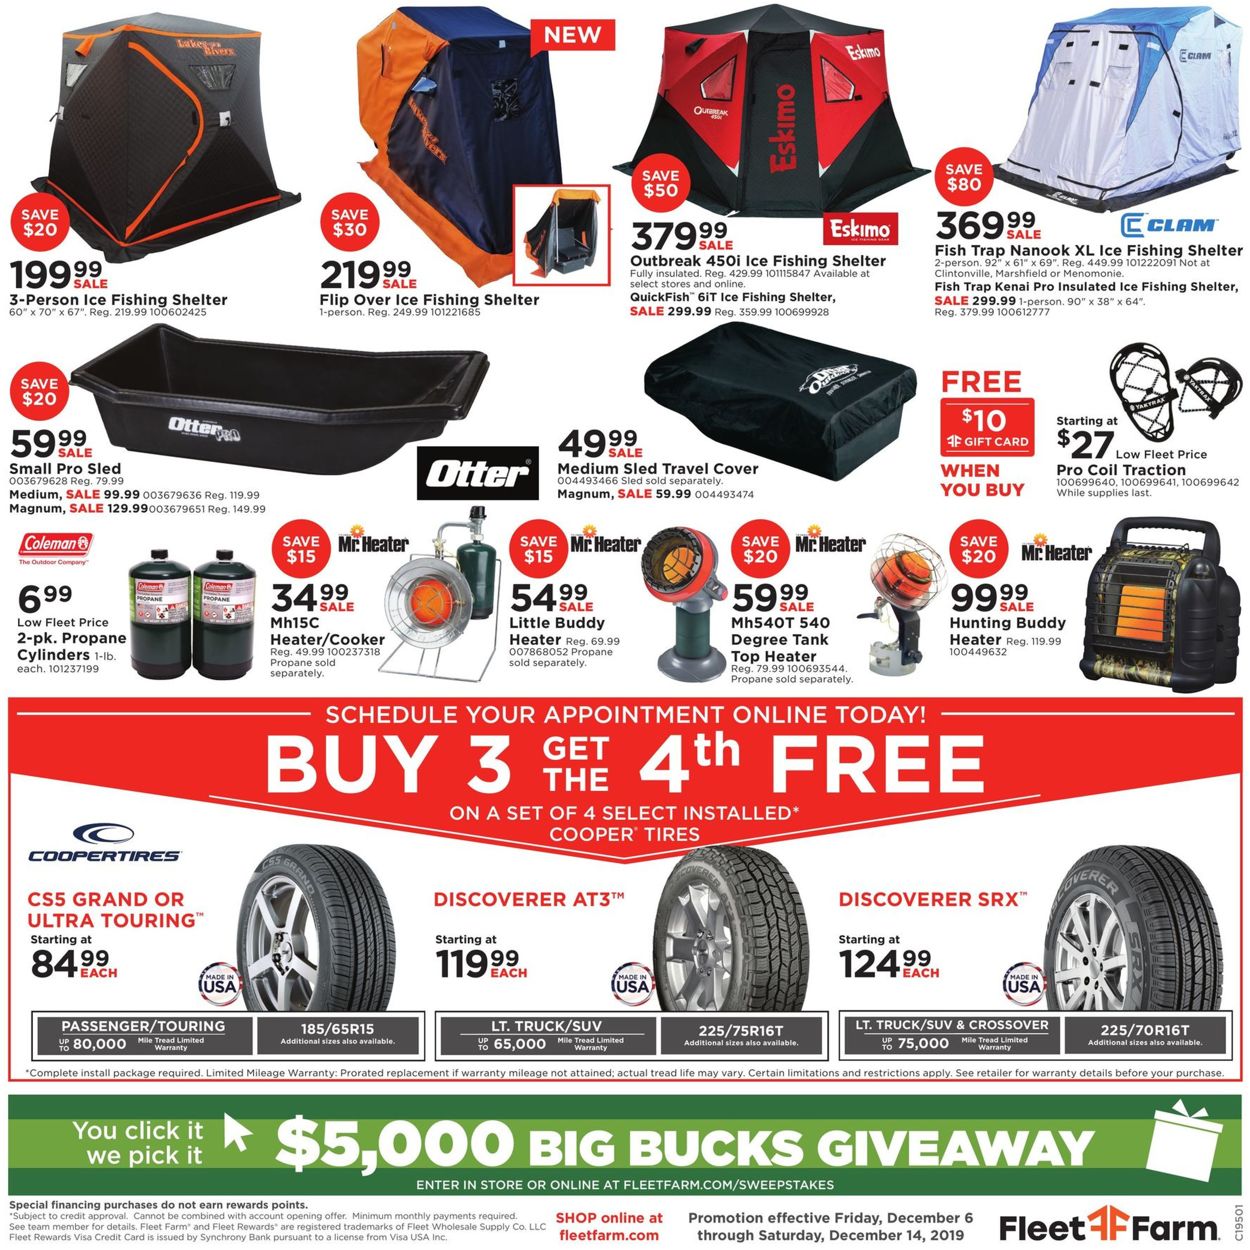 mills-fleet-farm-current-weekly-ad-12-06-12-14-2019-40-frequent